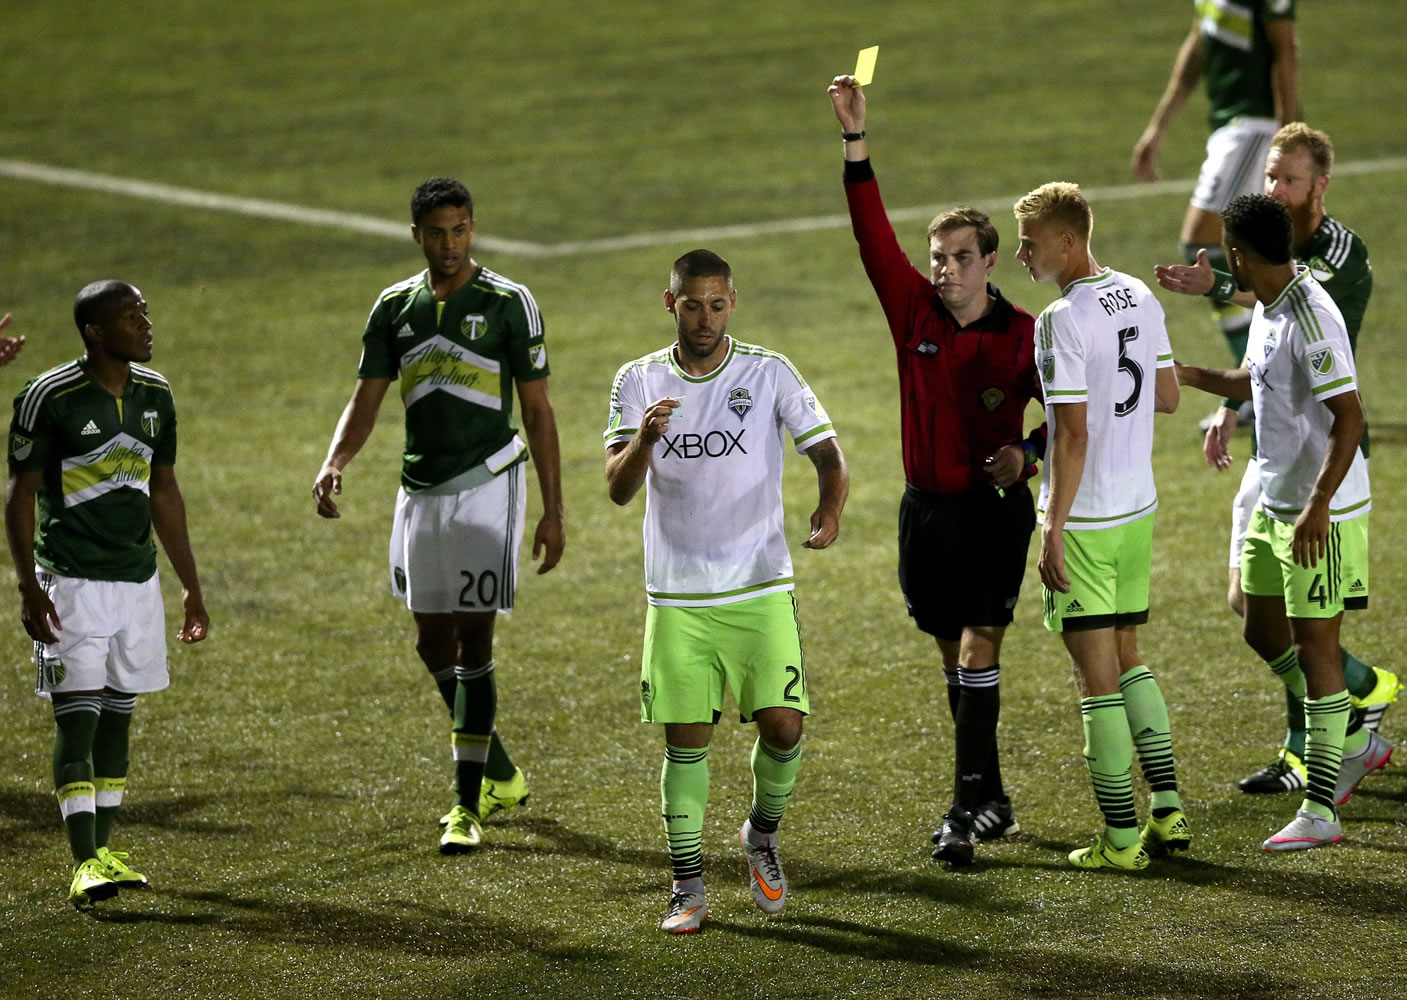 Seattle Sounders FC's forward Clint Dempsey (2) appears to rip up referee Daniel Radford's notebook after Radford issued a red card to teammate Michael Ariza while playing the Portland Timbers in a U.S. Open Cup soccer match at Starfire Stadium in Tukwila, Wash. Dempsey was issued a red card his actions.